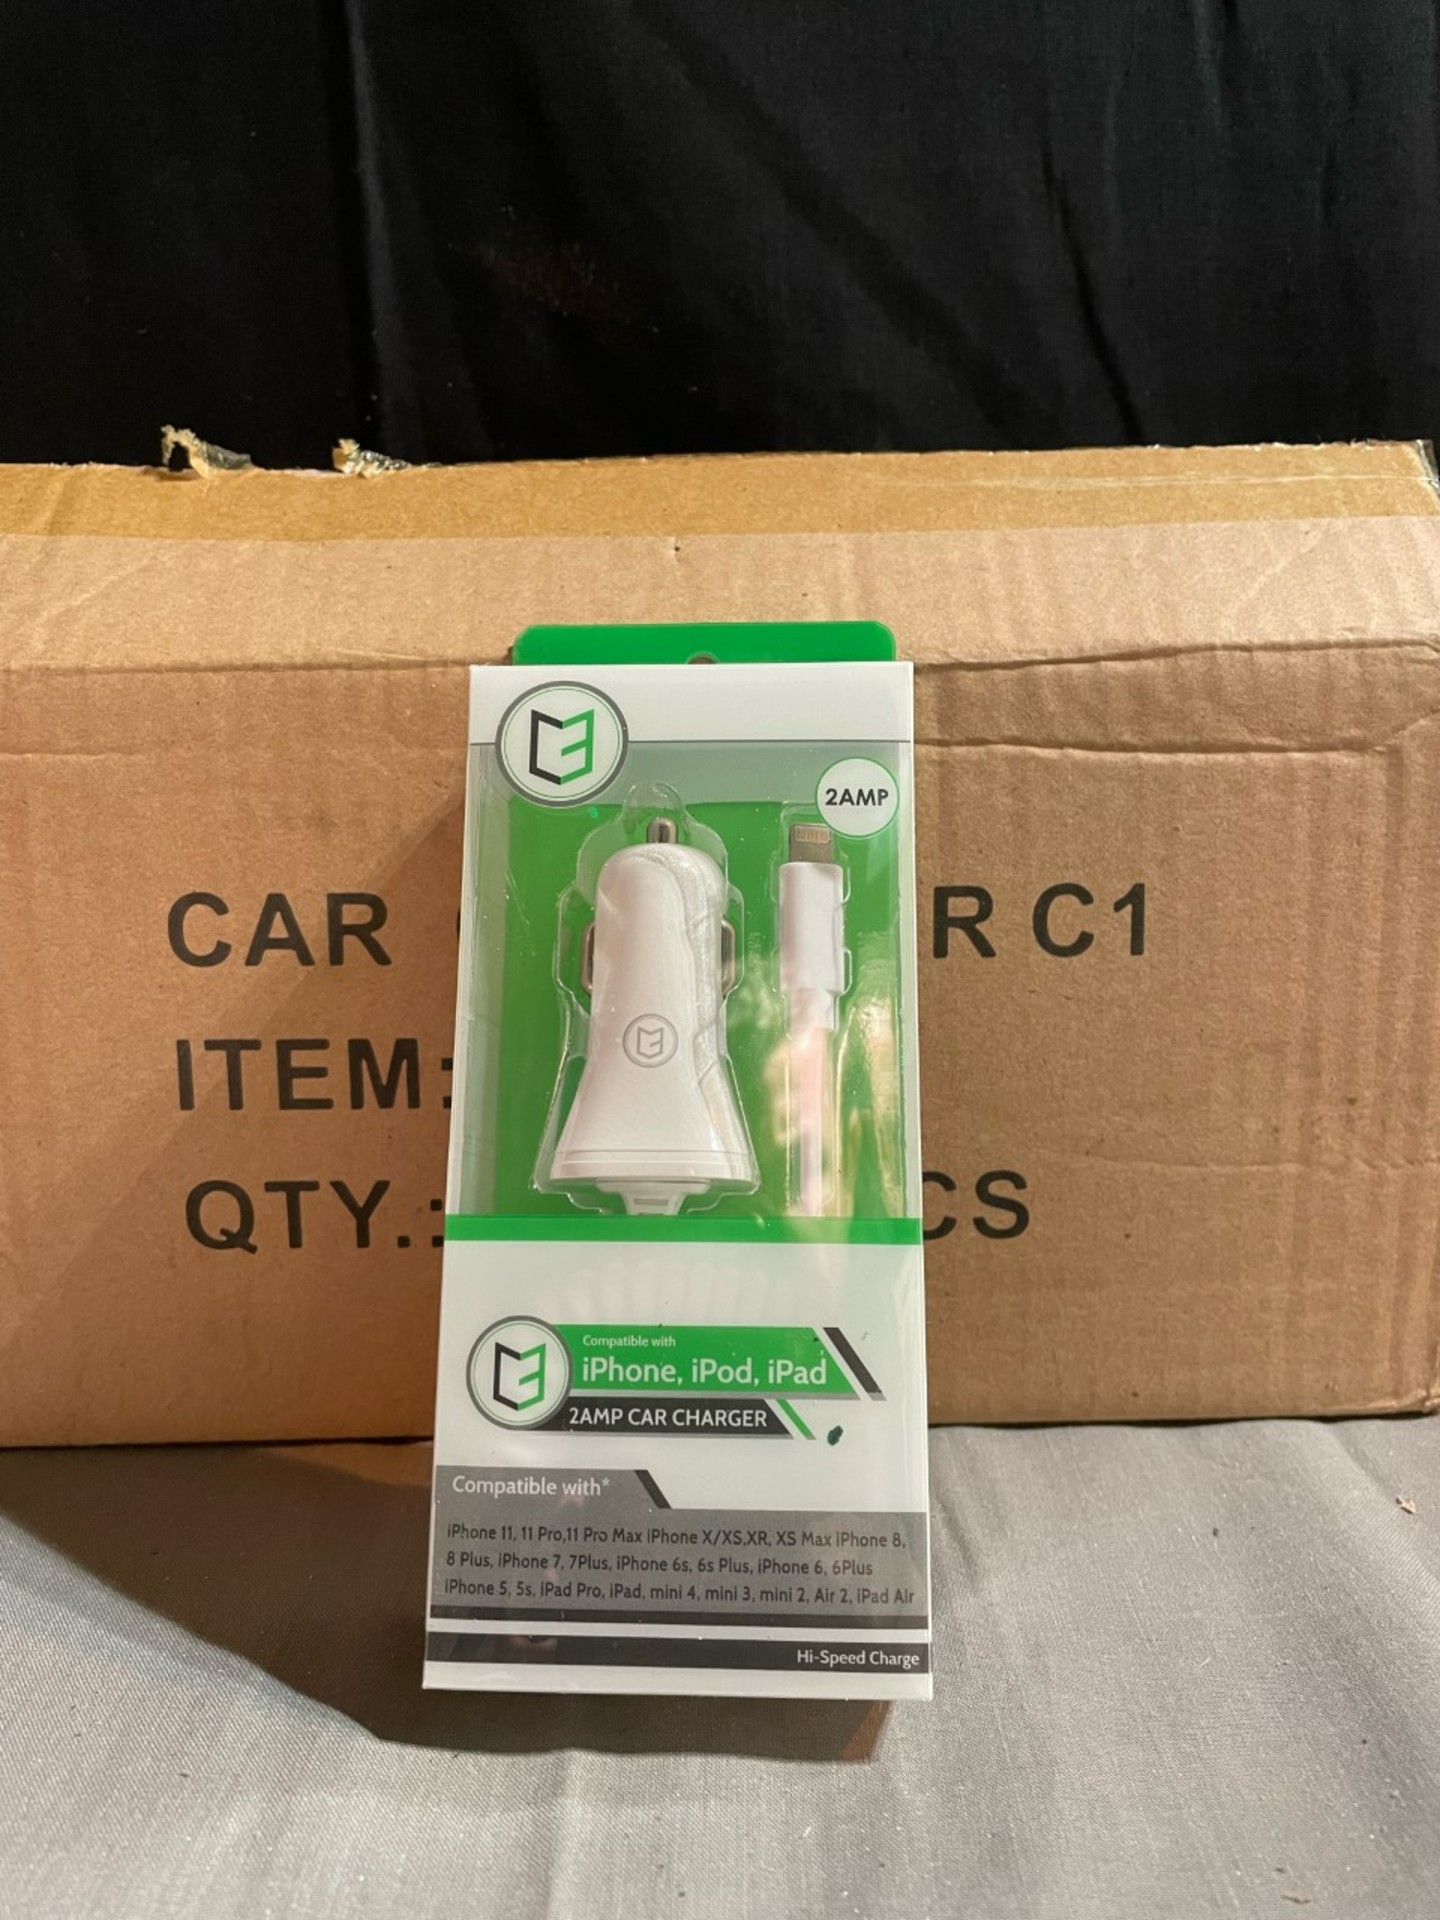 1x iPhone car charger new in box.